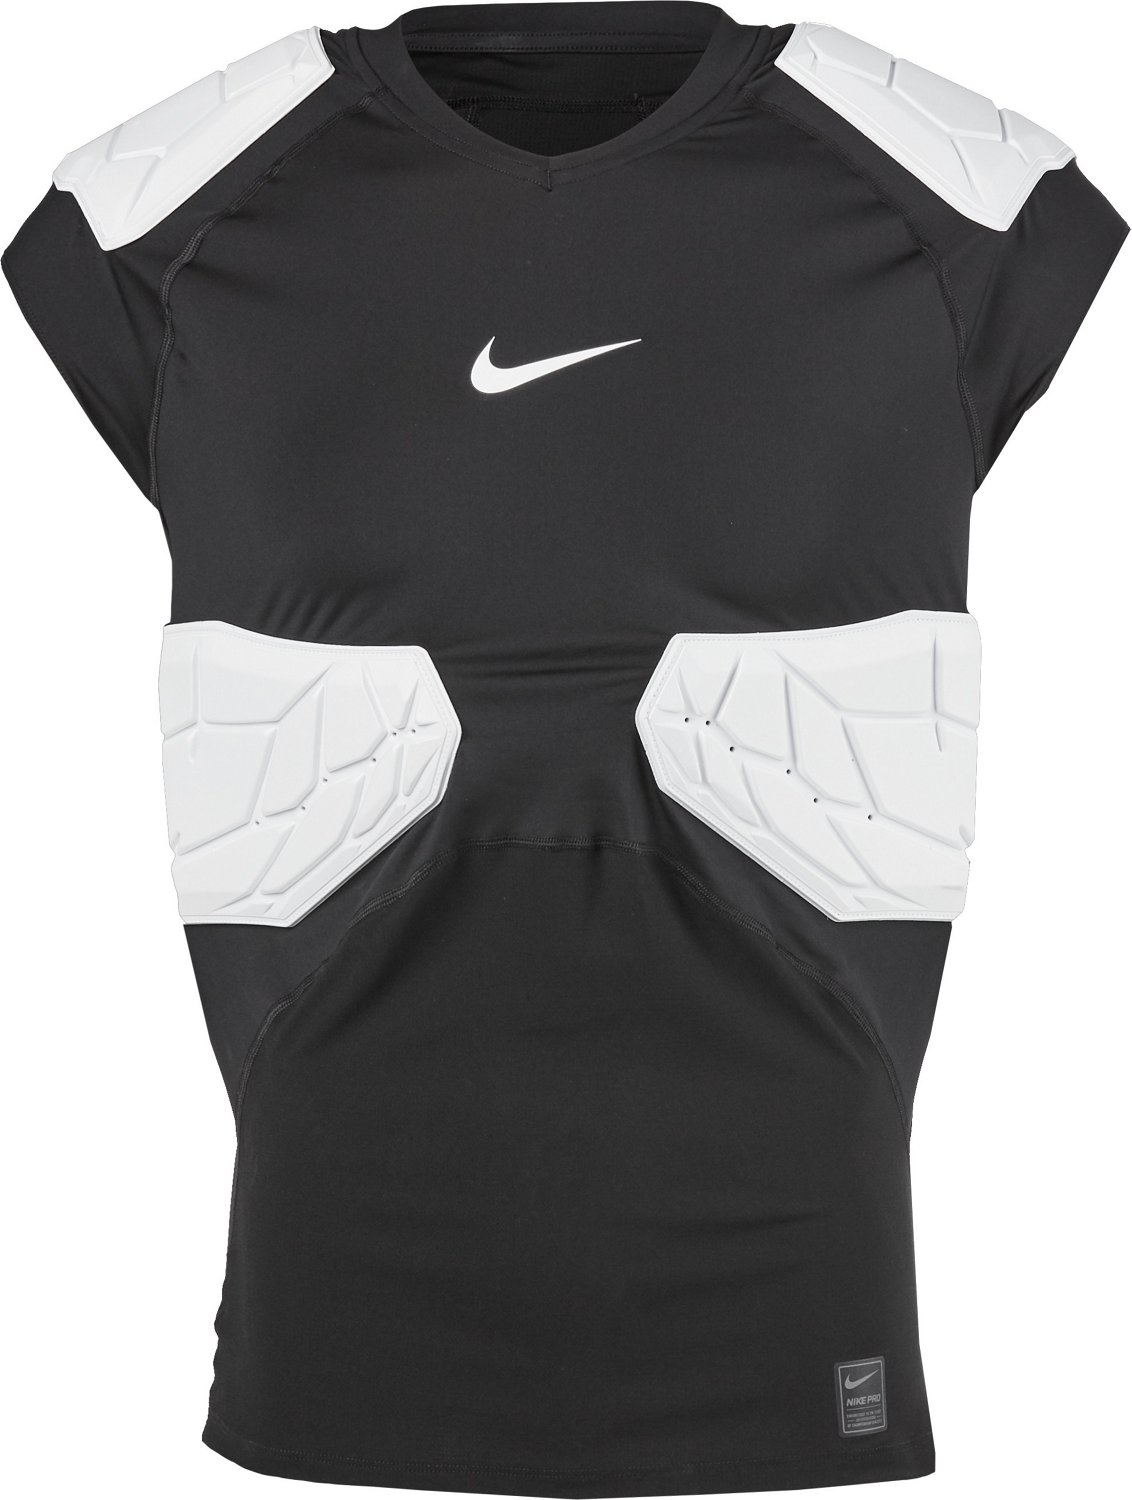 Nike Pro Hyperstrong 4 Pad Football Top | Academy